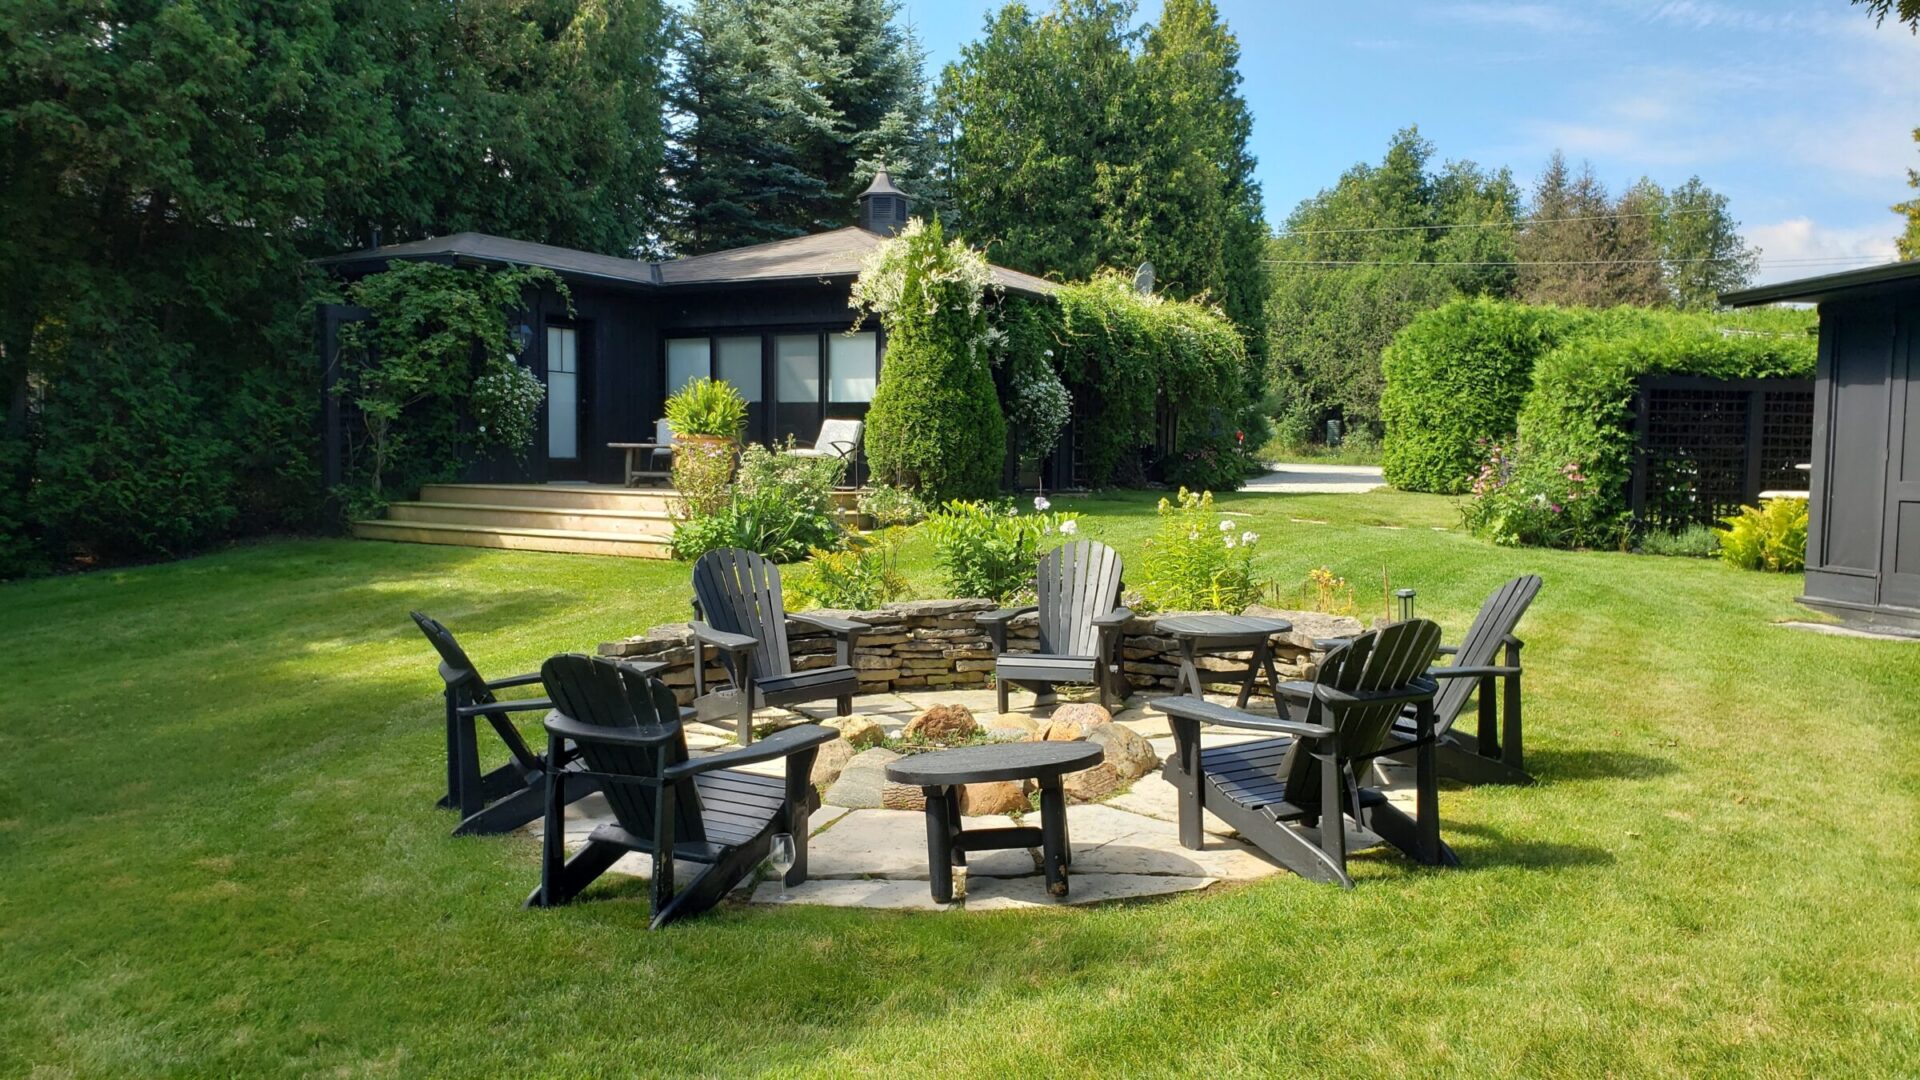 This image shows a cozy backyard with a fire pit surrounded by Adirondack chairs. A lush lawn, garden beds, hedges, and a black modern house are visible.